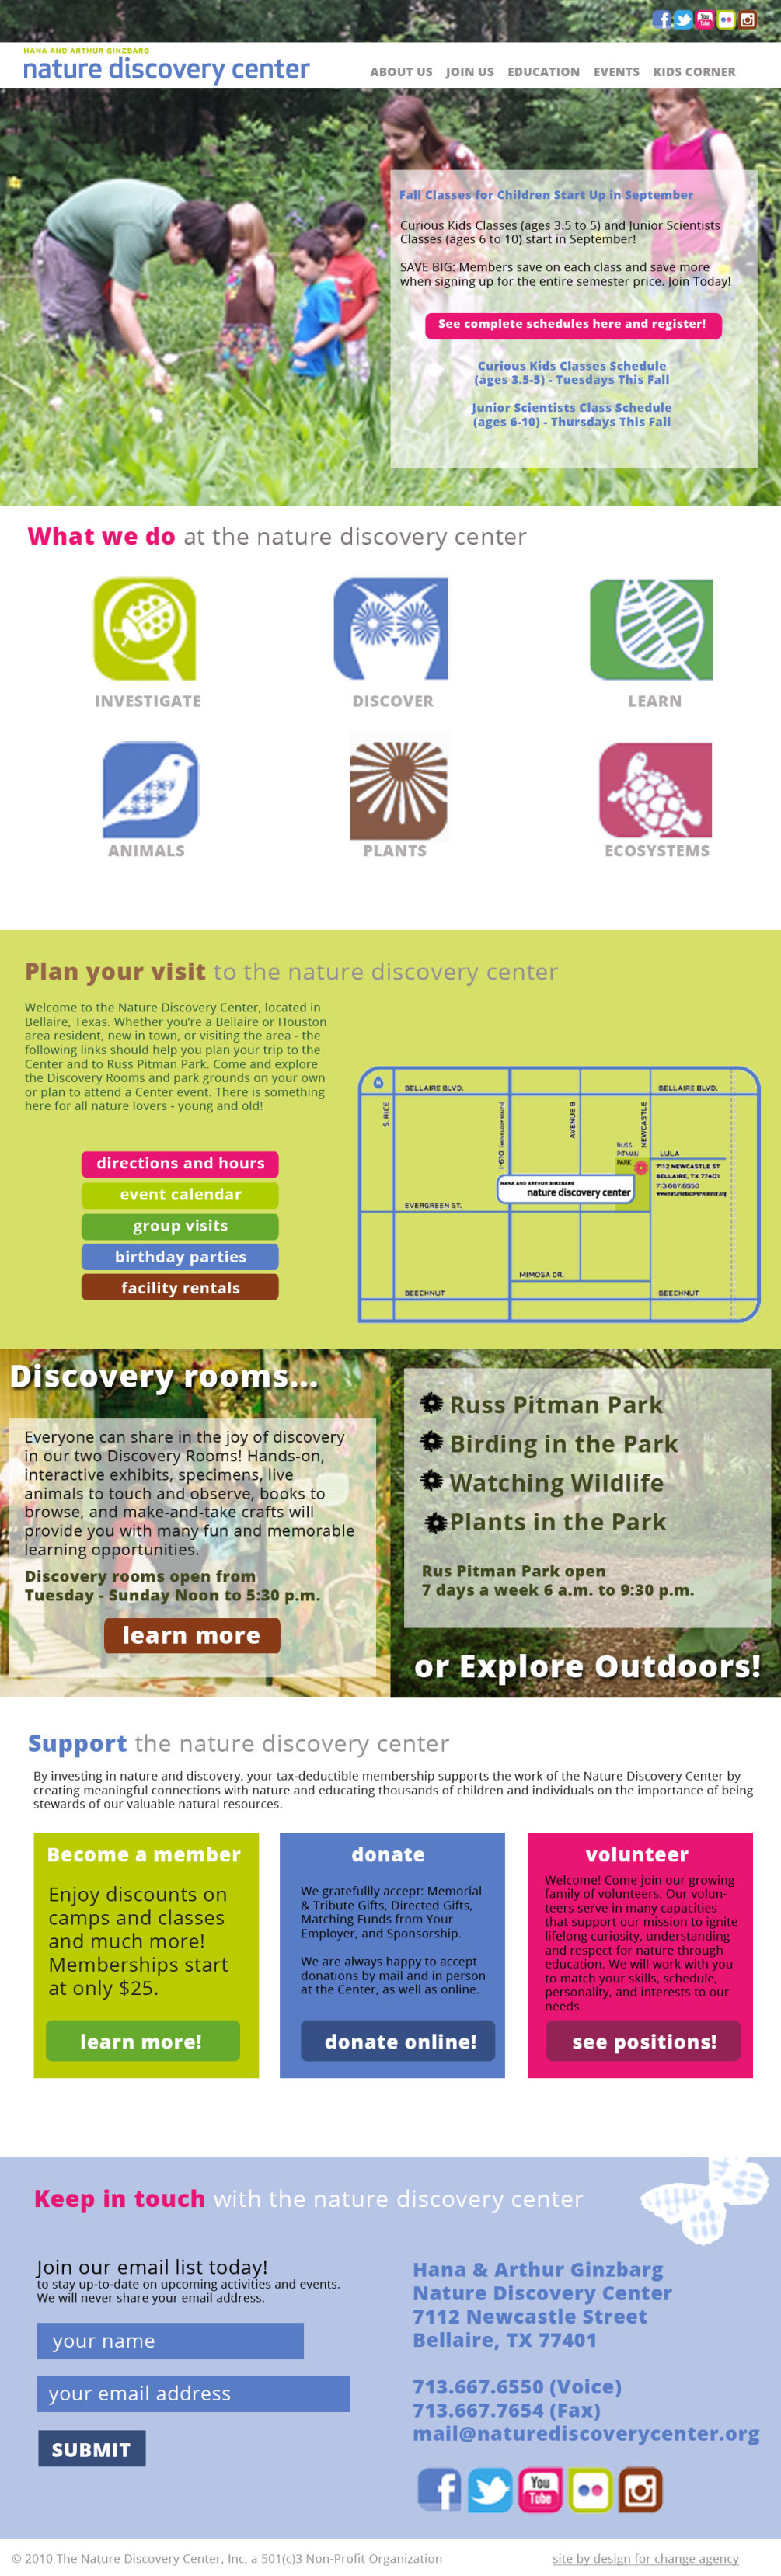 nature discovery center